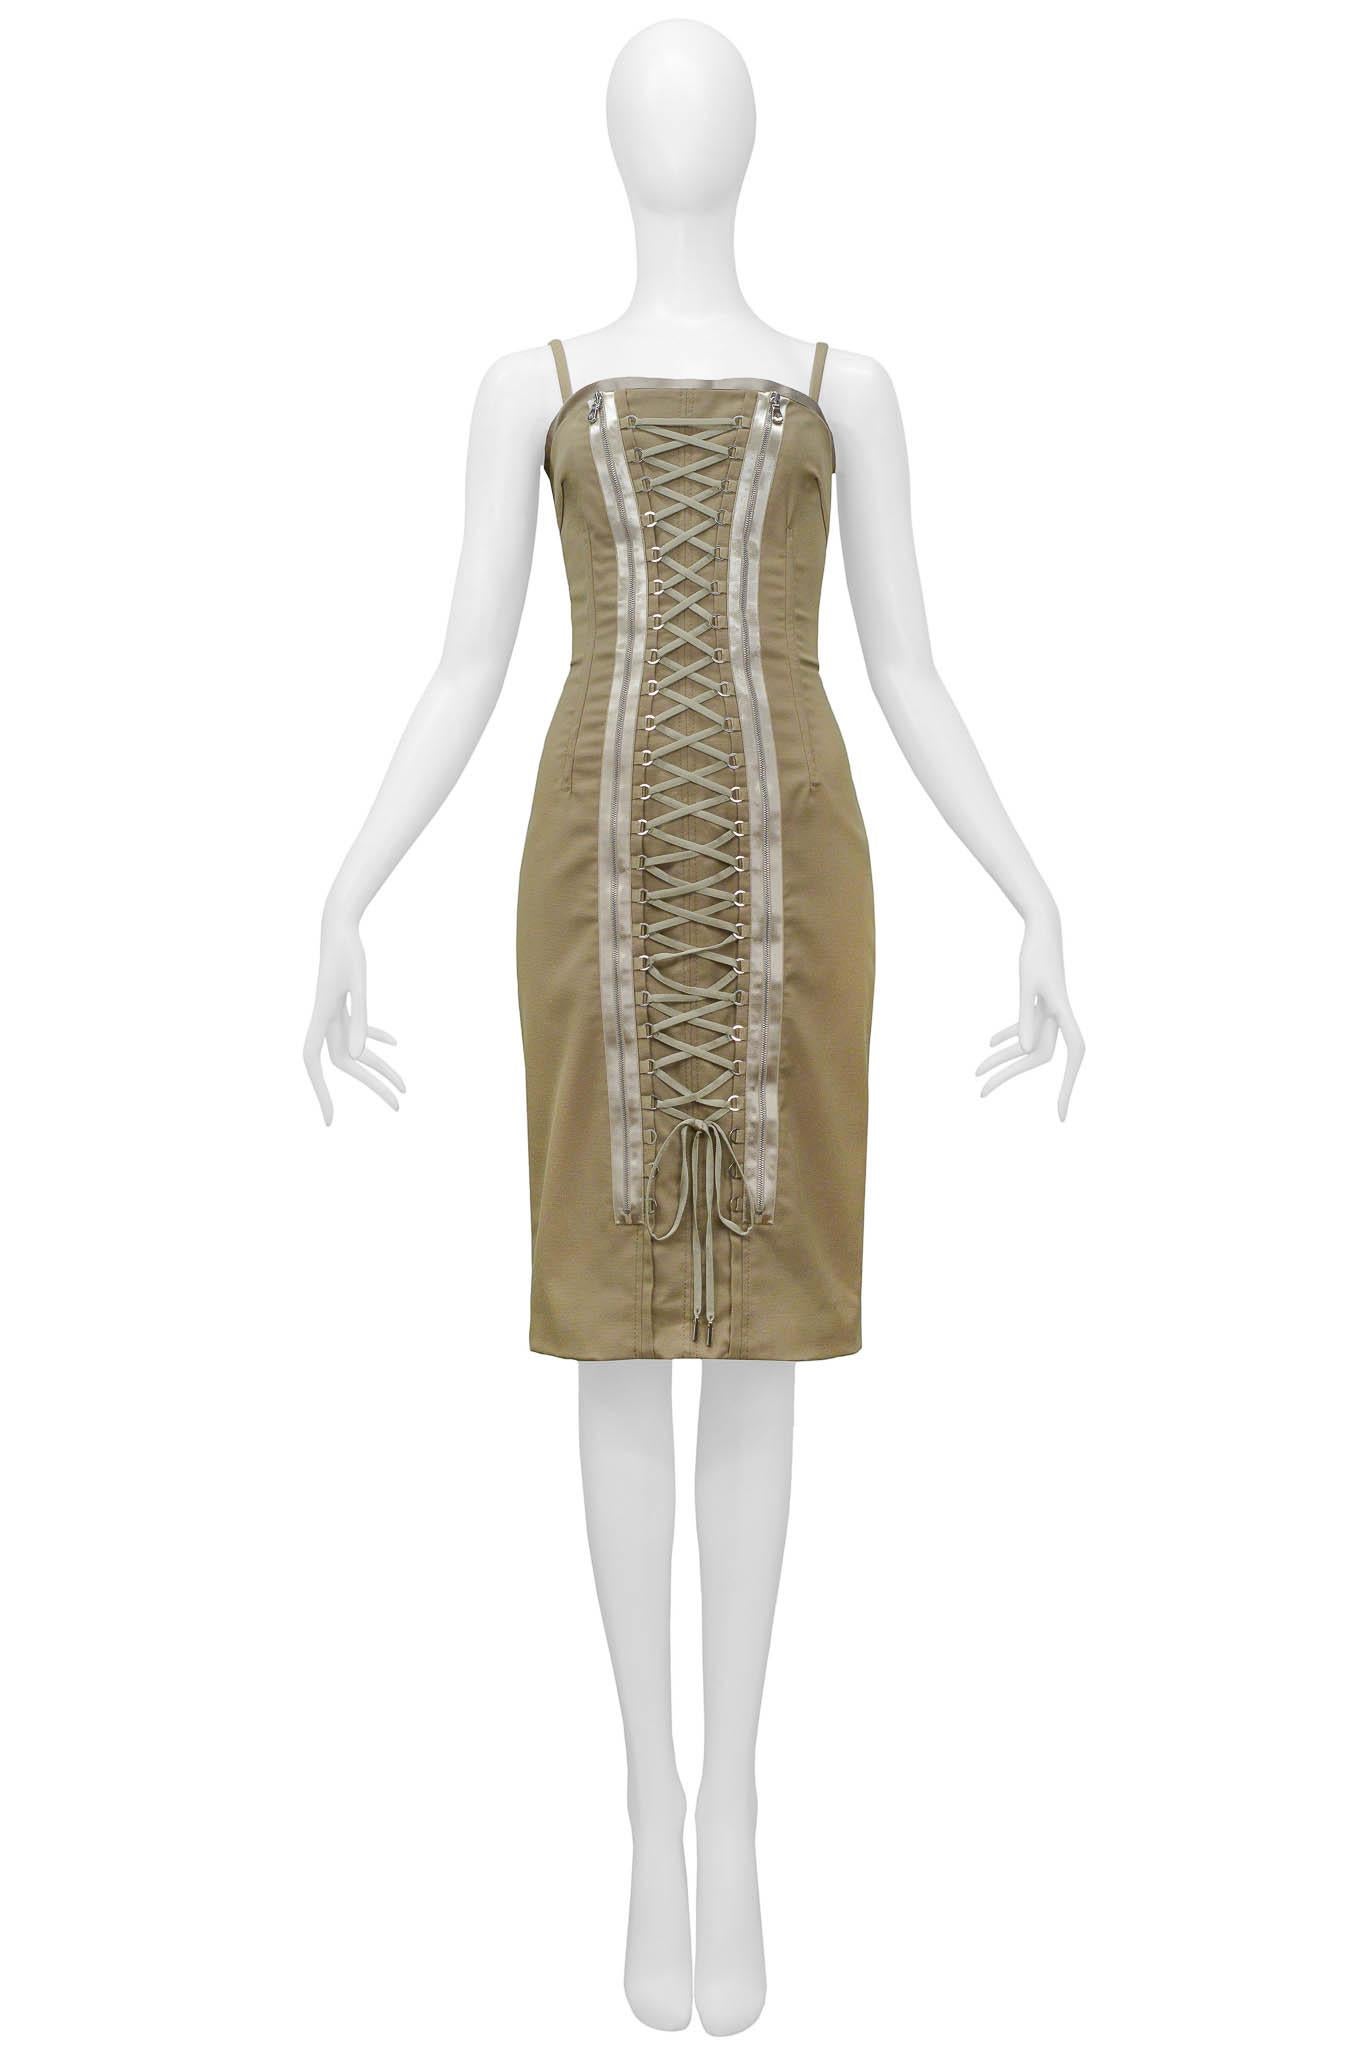 Resurrection Vintage is excited to offer a vintage Dolce & Gabbana khaki corset dress featuring, lace-up detailing and zippers down the front of the dress, satin trim along the top of the dress, and a kick pleat in the back.

Dolce & Gabbana
Size